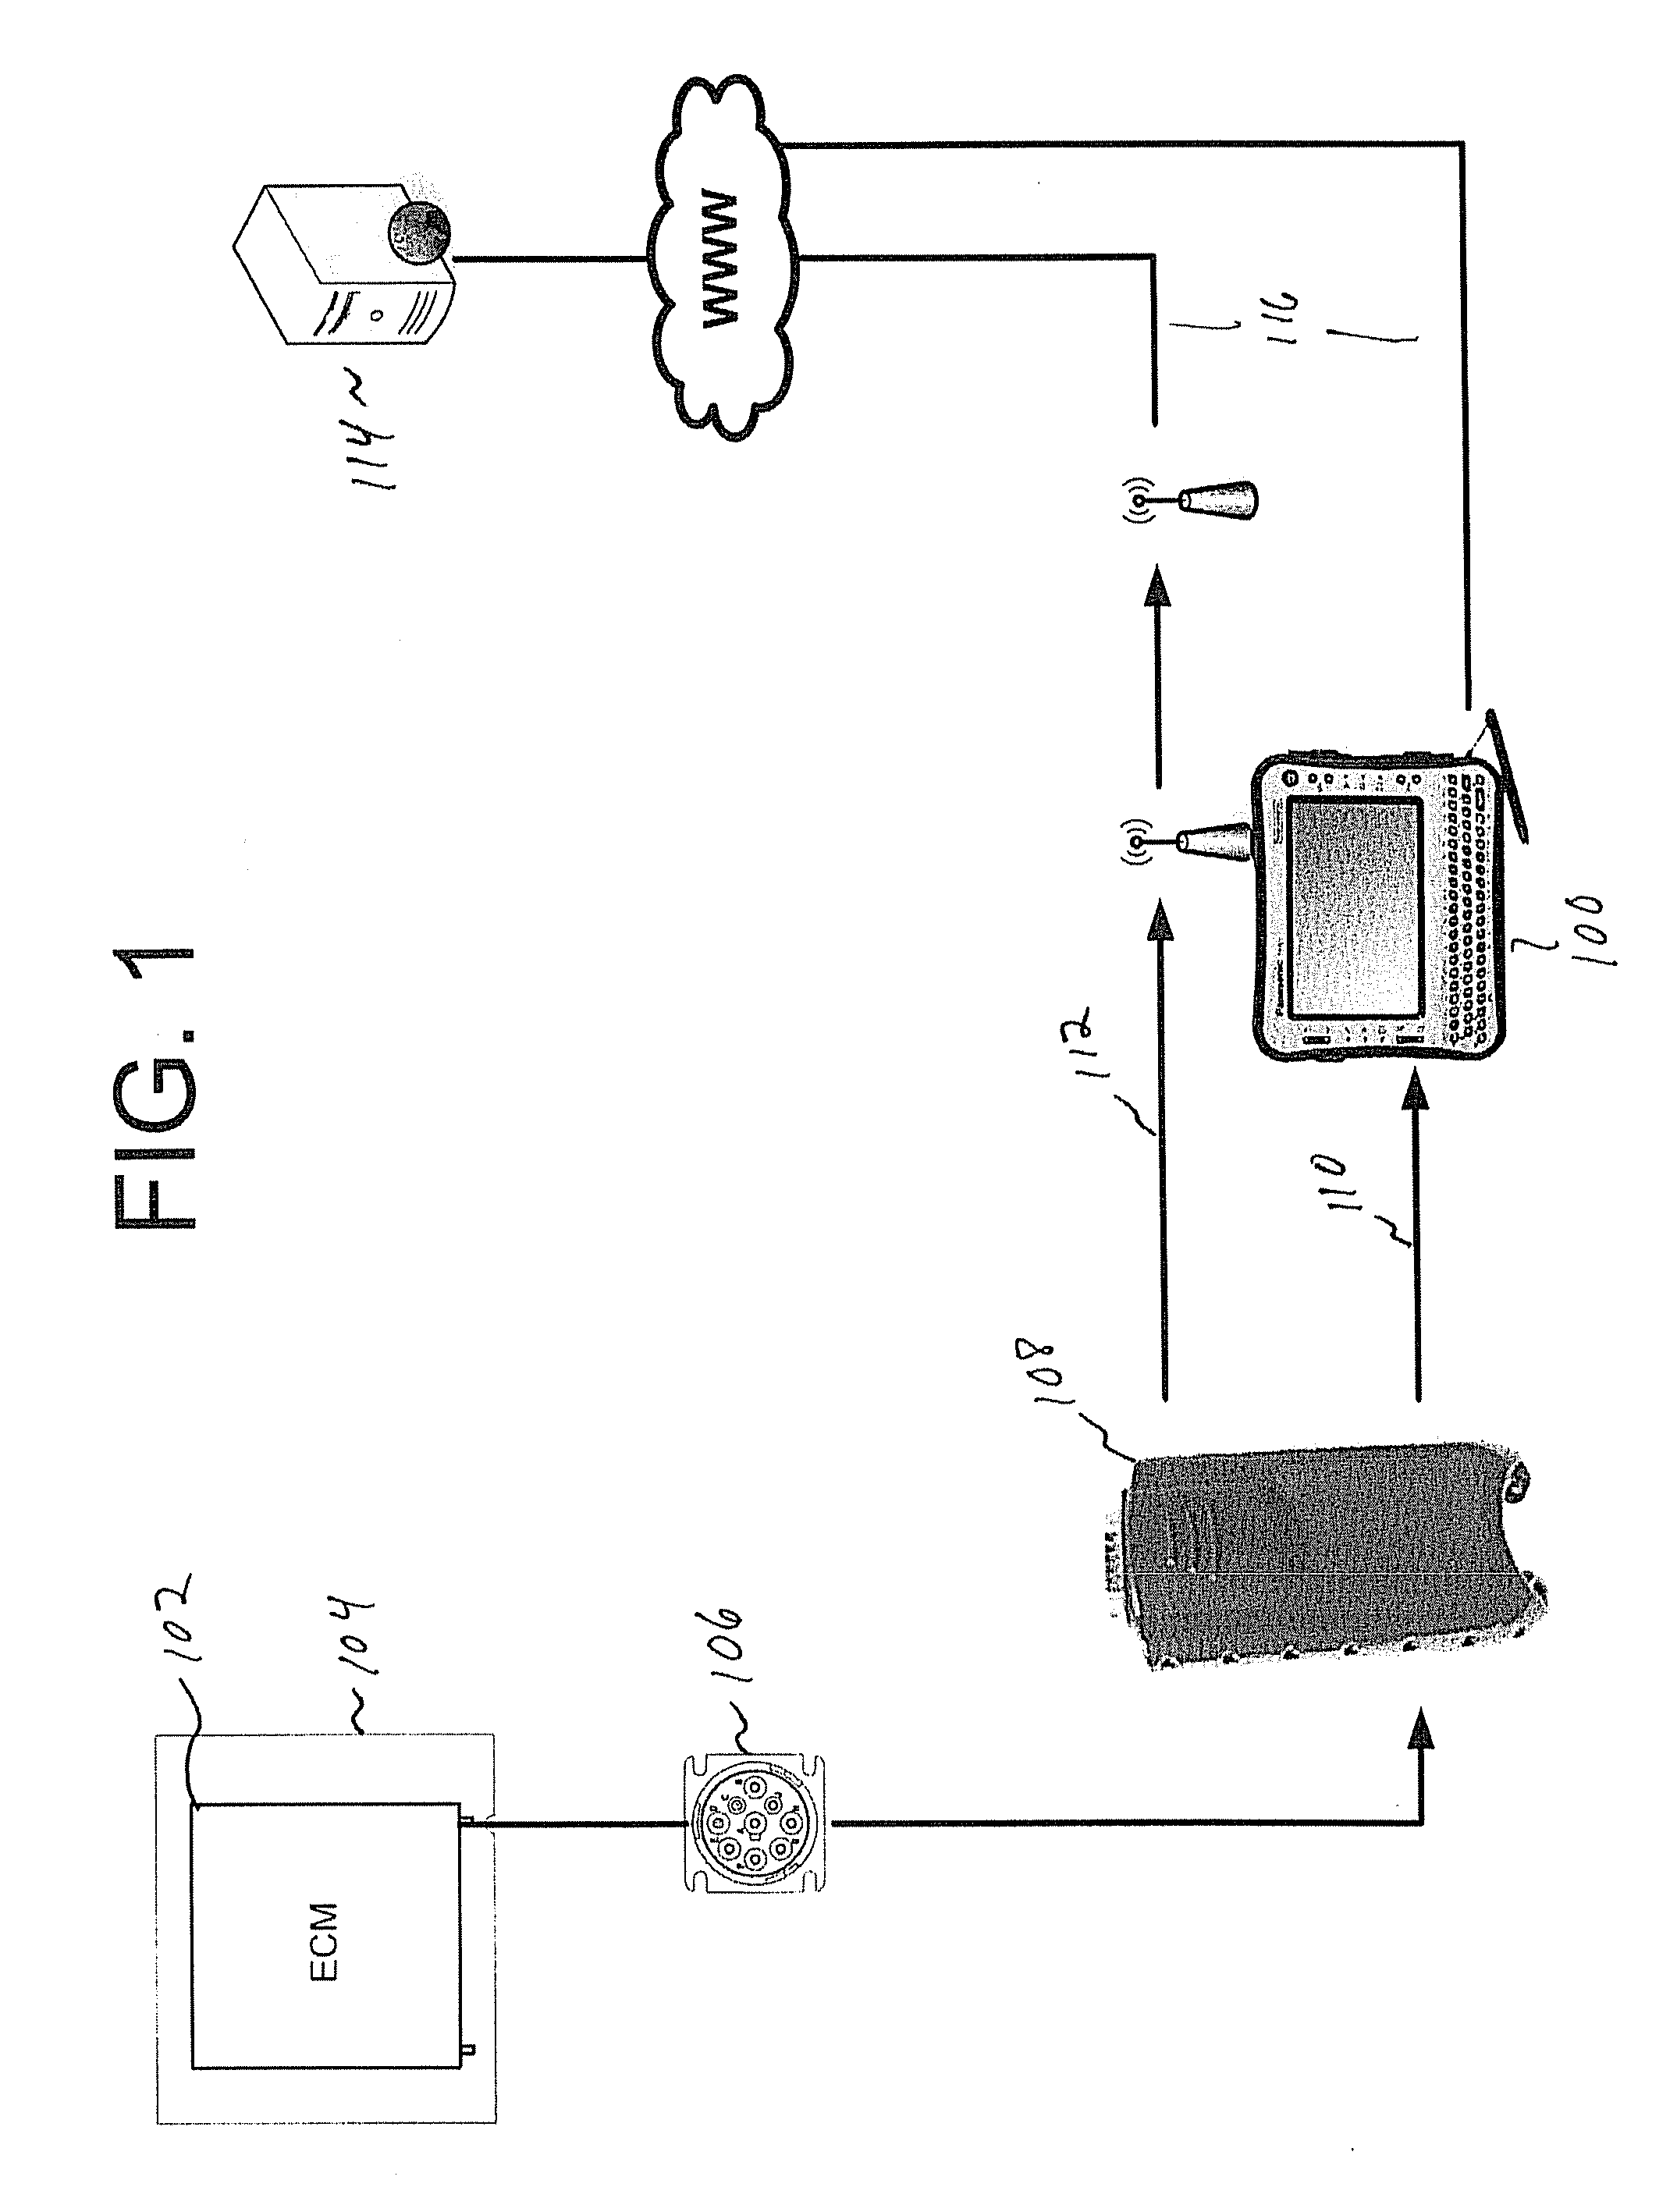 Method and System for Retrieving Diagnostic Information